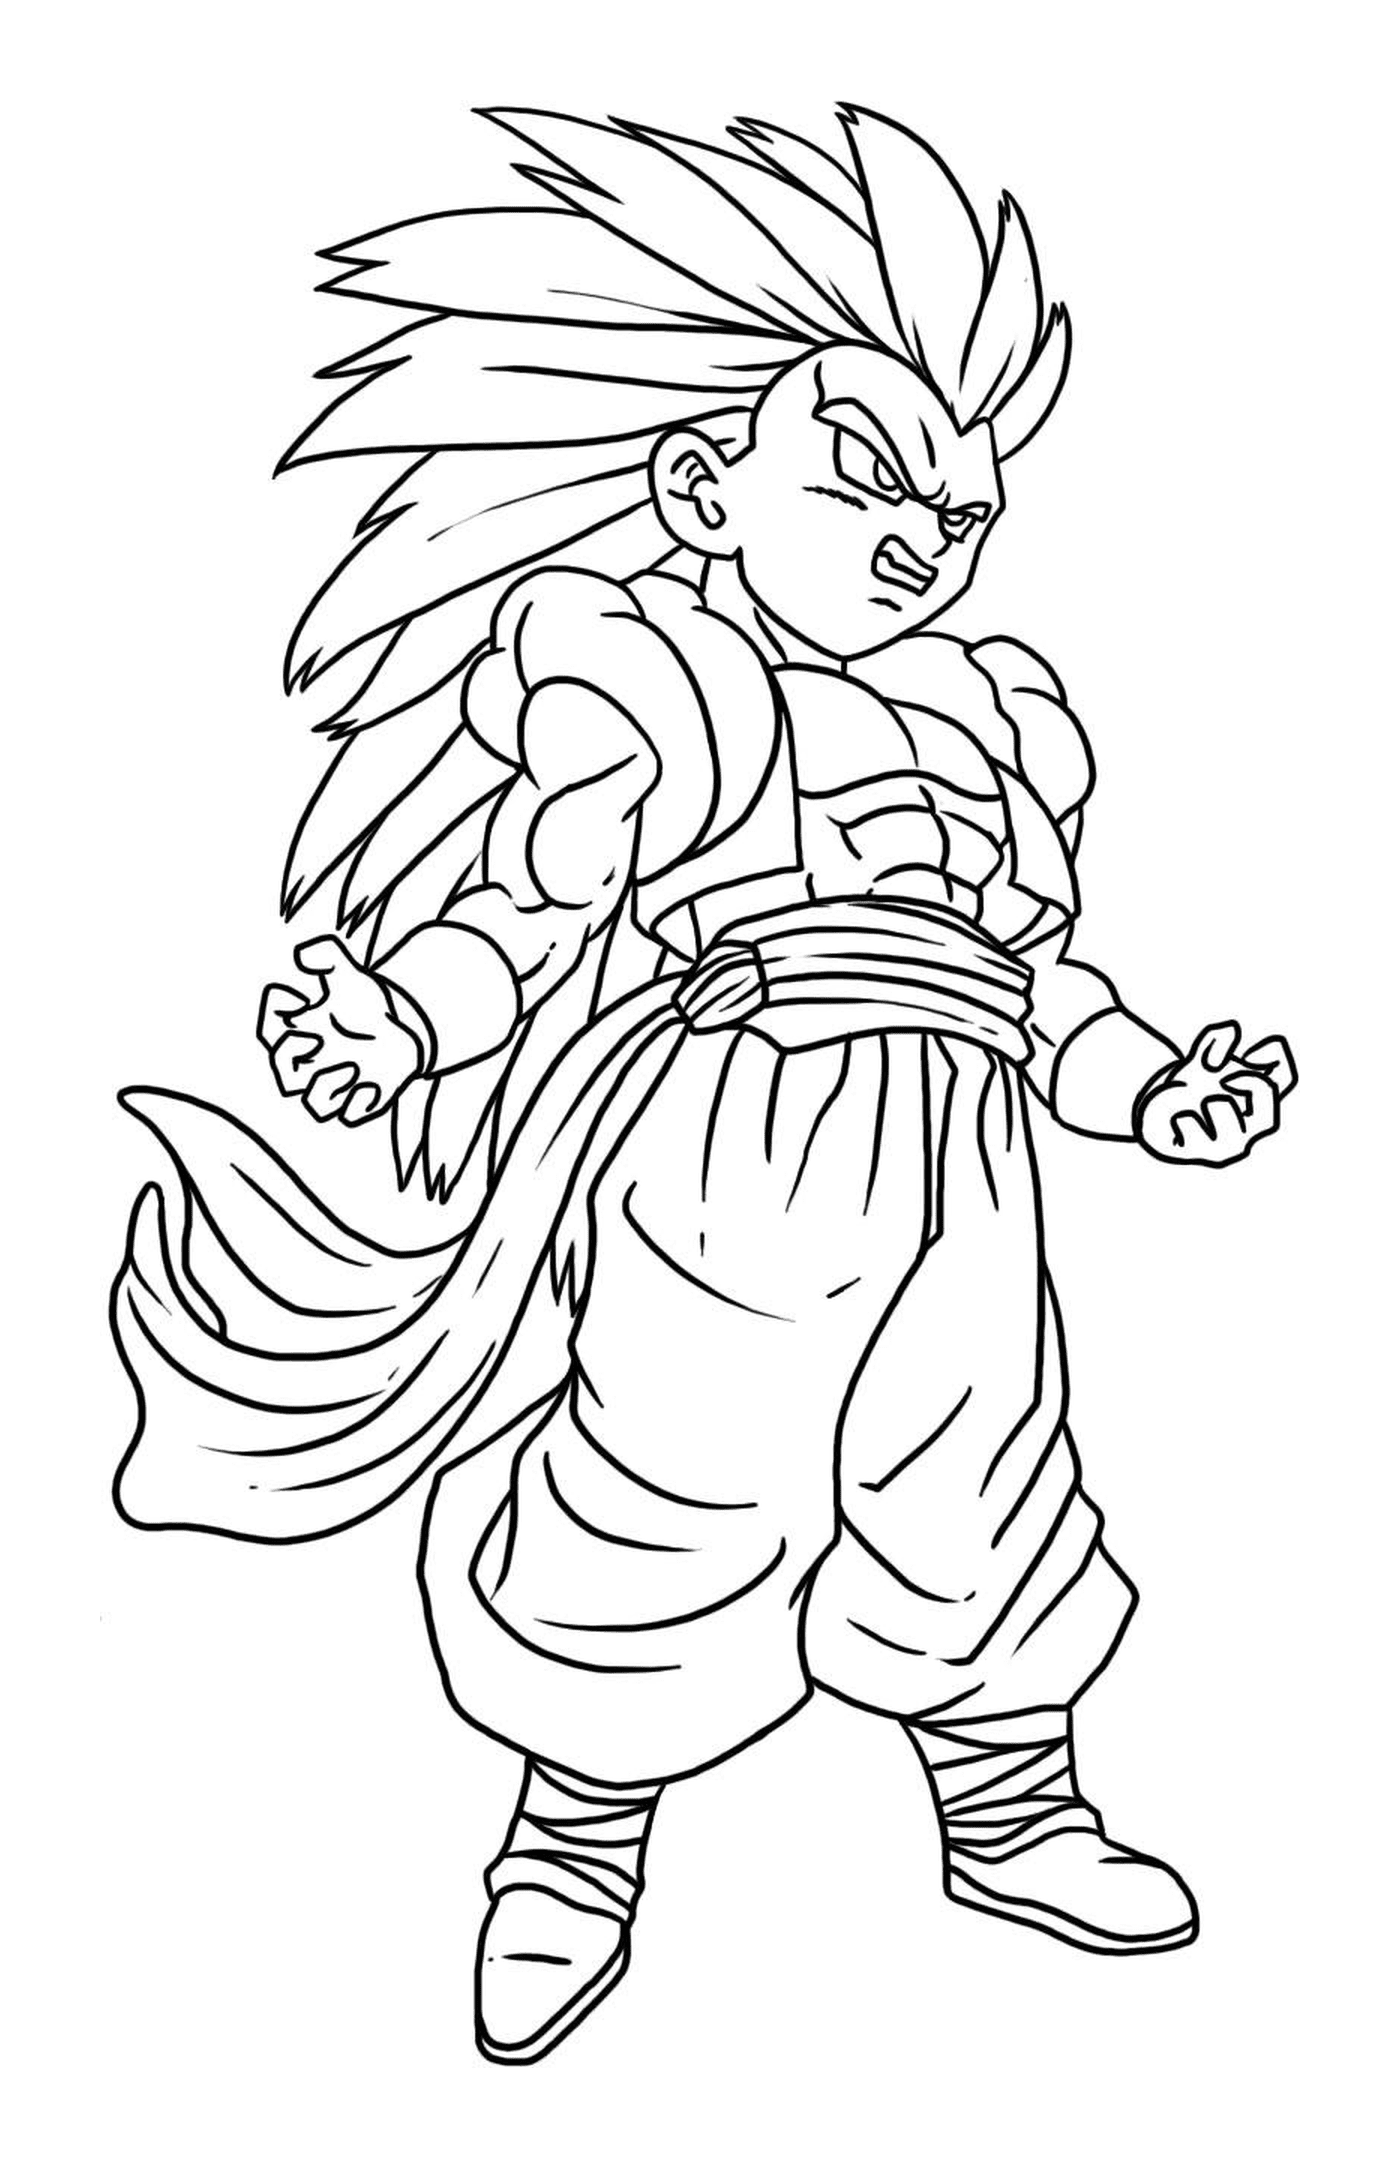  A character from Dragon Ball Z in episode 185 